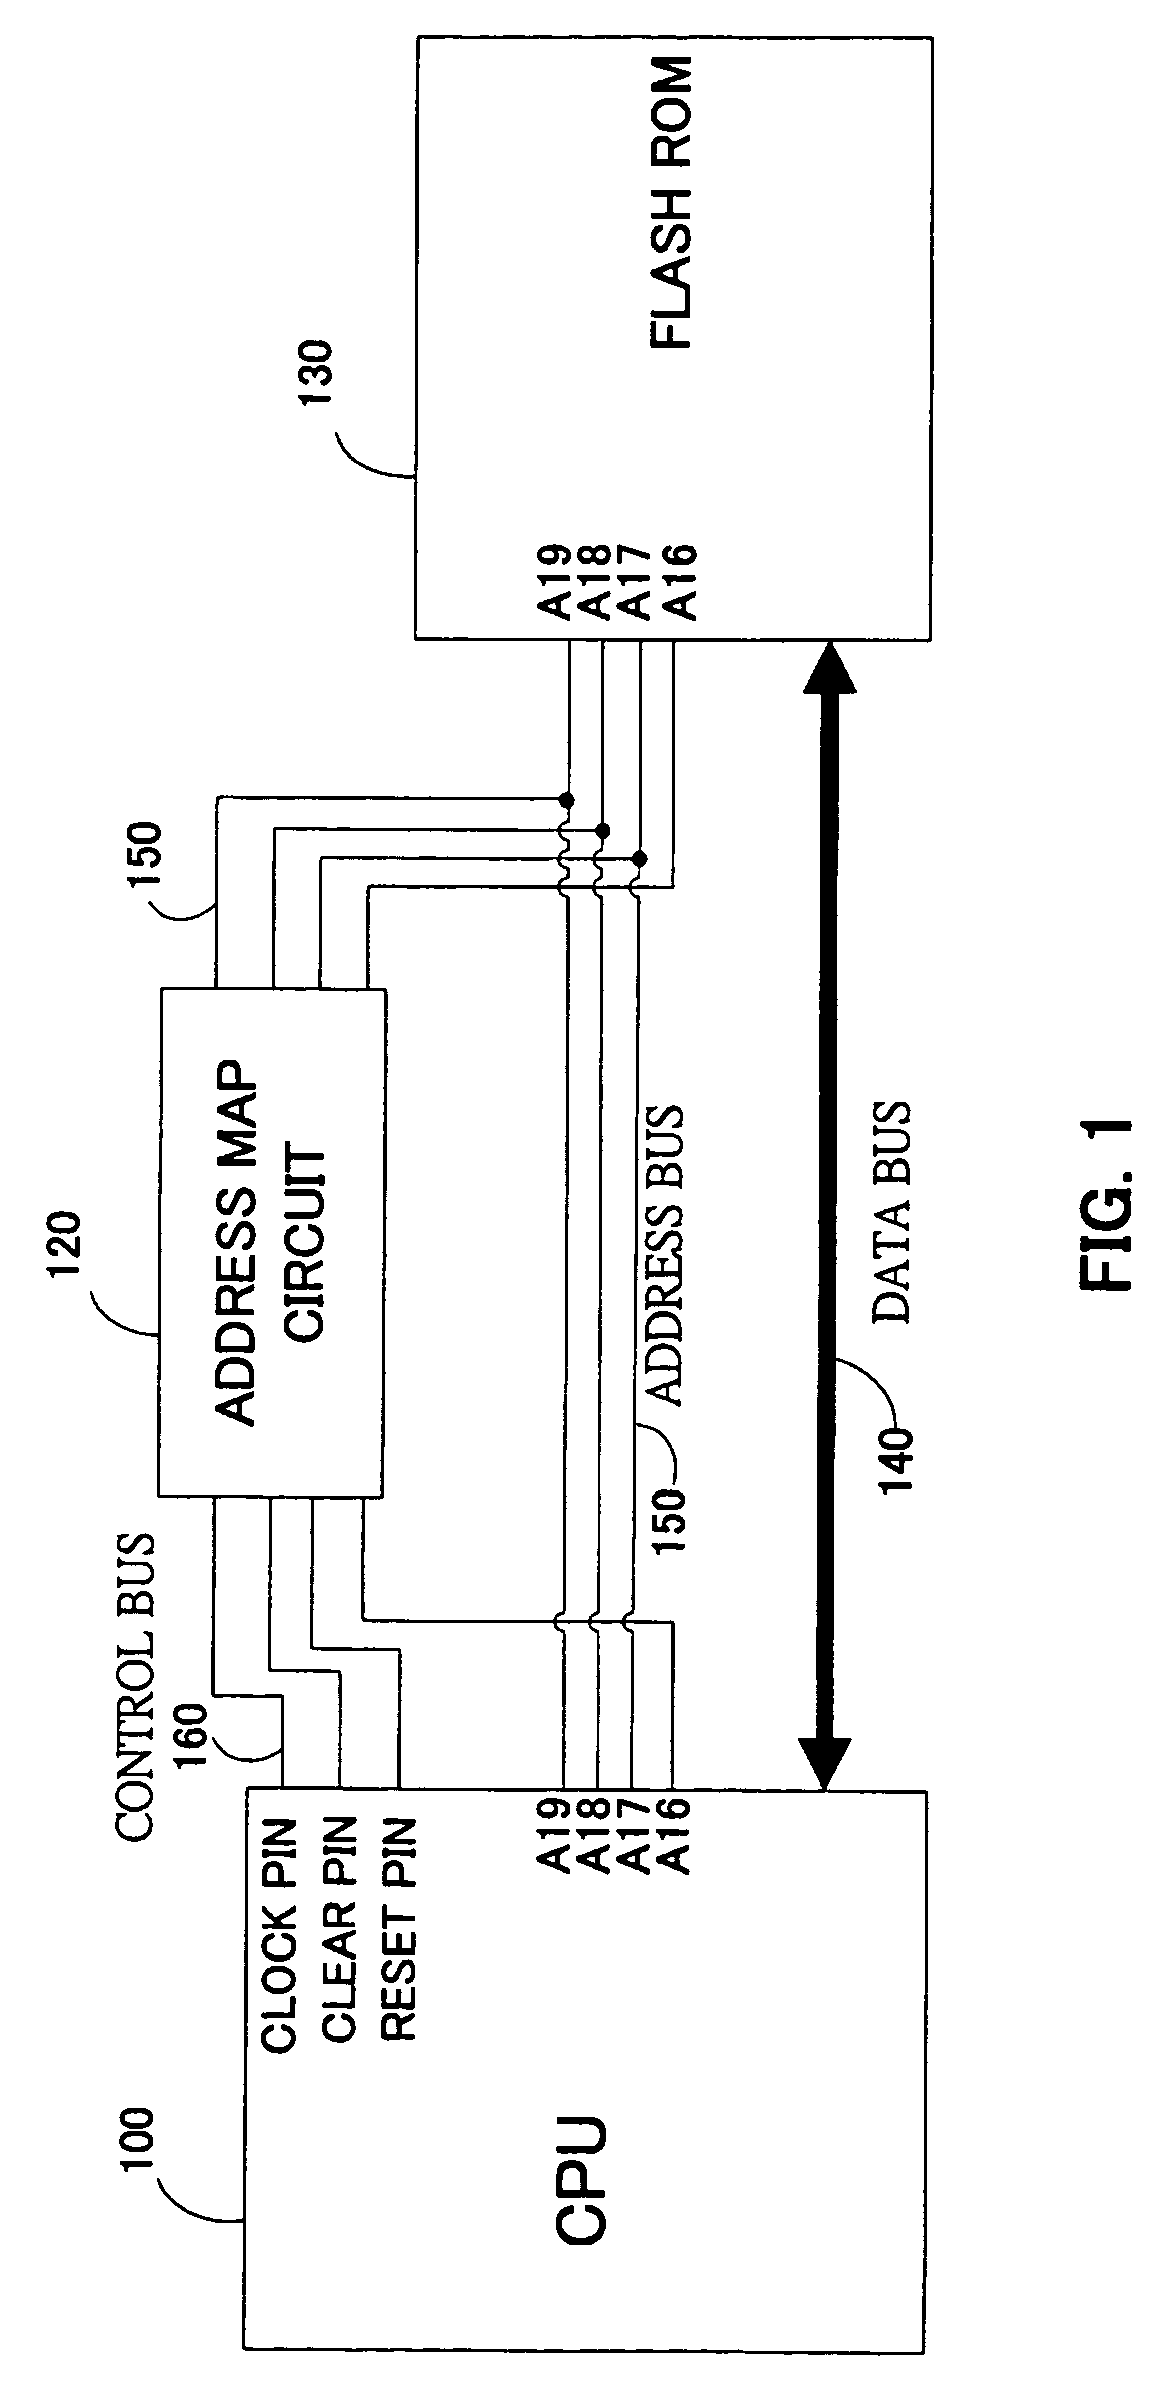 System and method for automatic booting based on single flash ROM